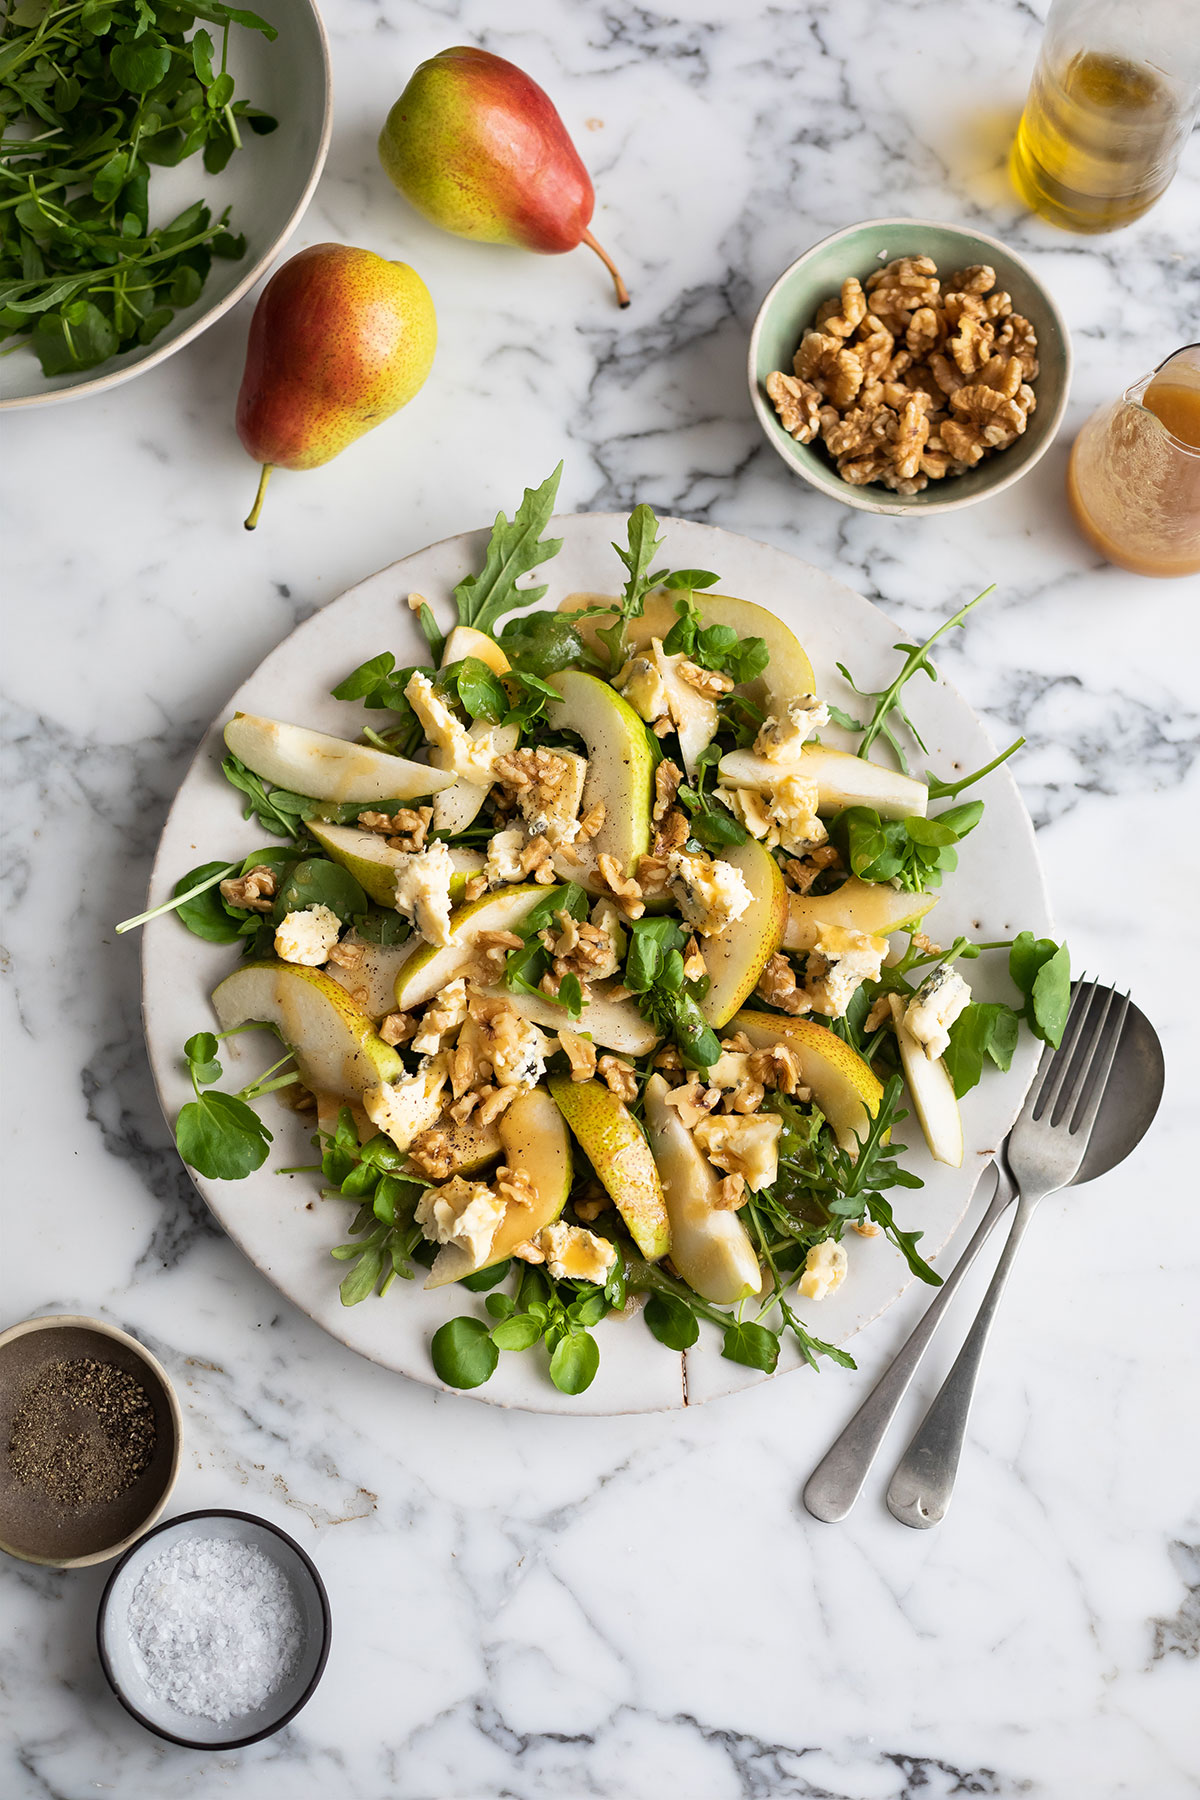 A classic pear, blue cheese & walnut salad with maple vinaigrette on a serving plate